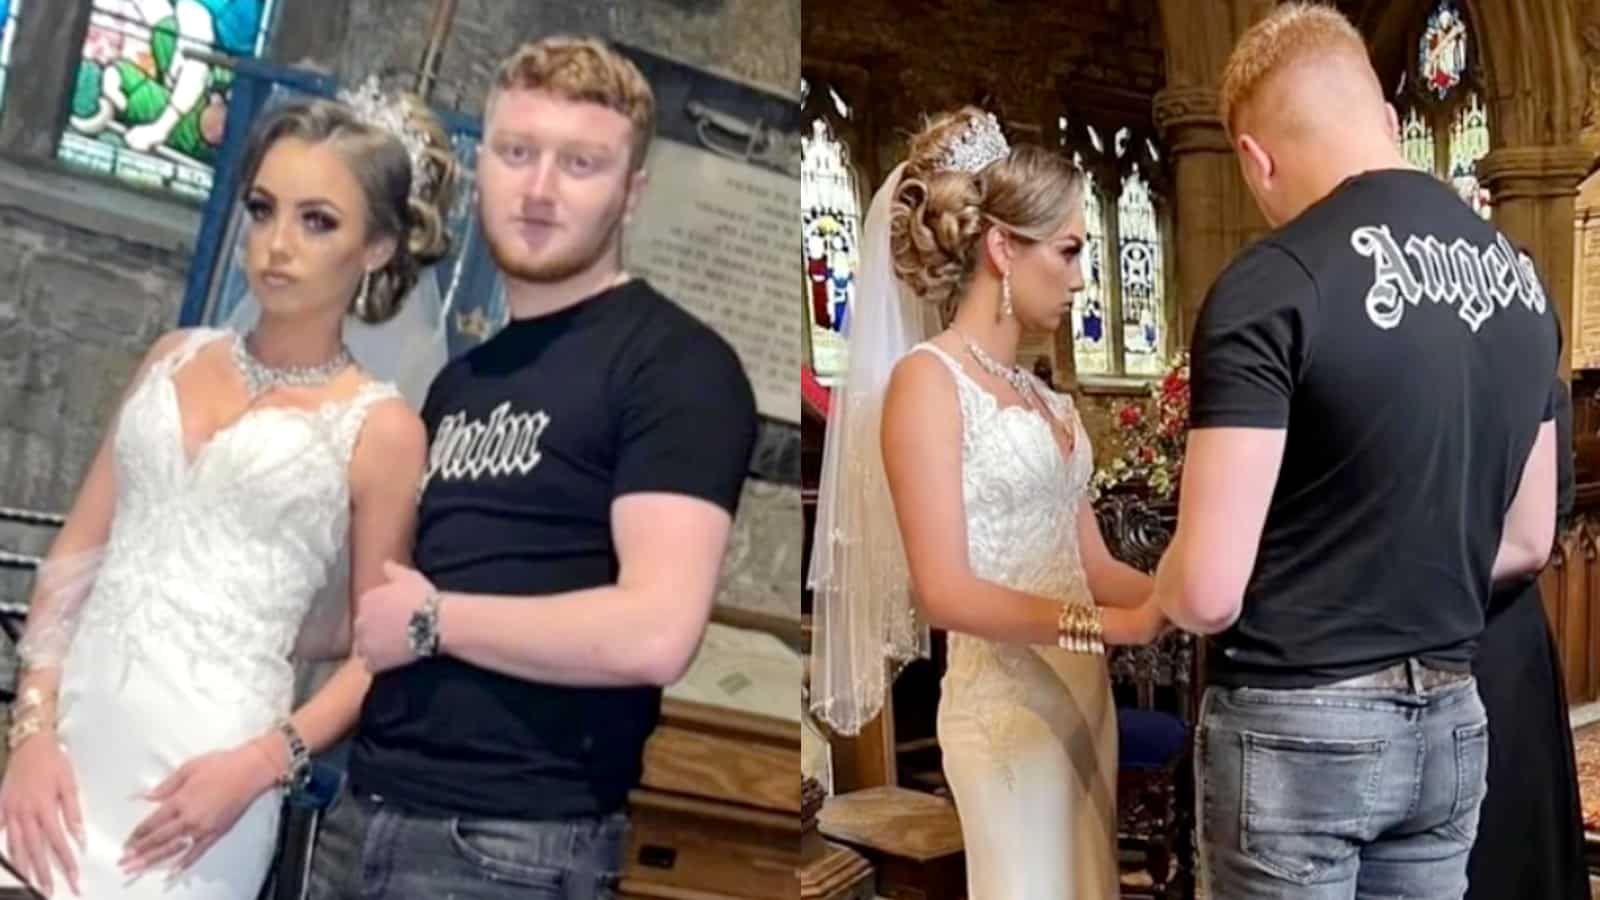 Woman in wedding dress and man in T-shirt